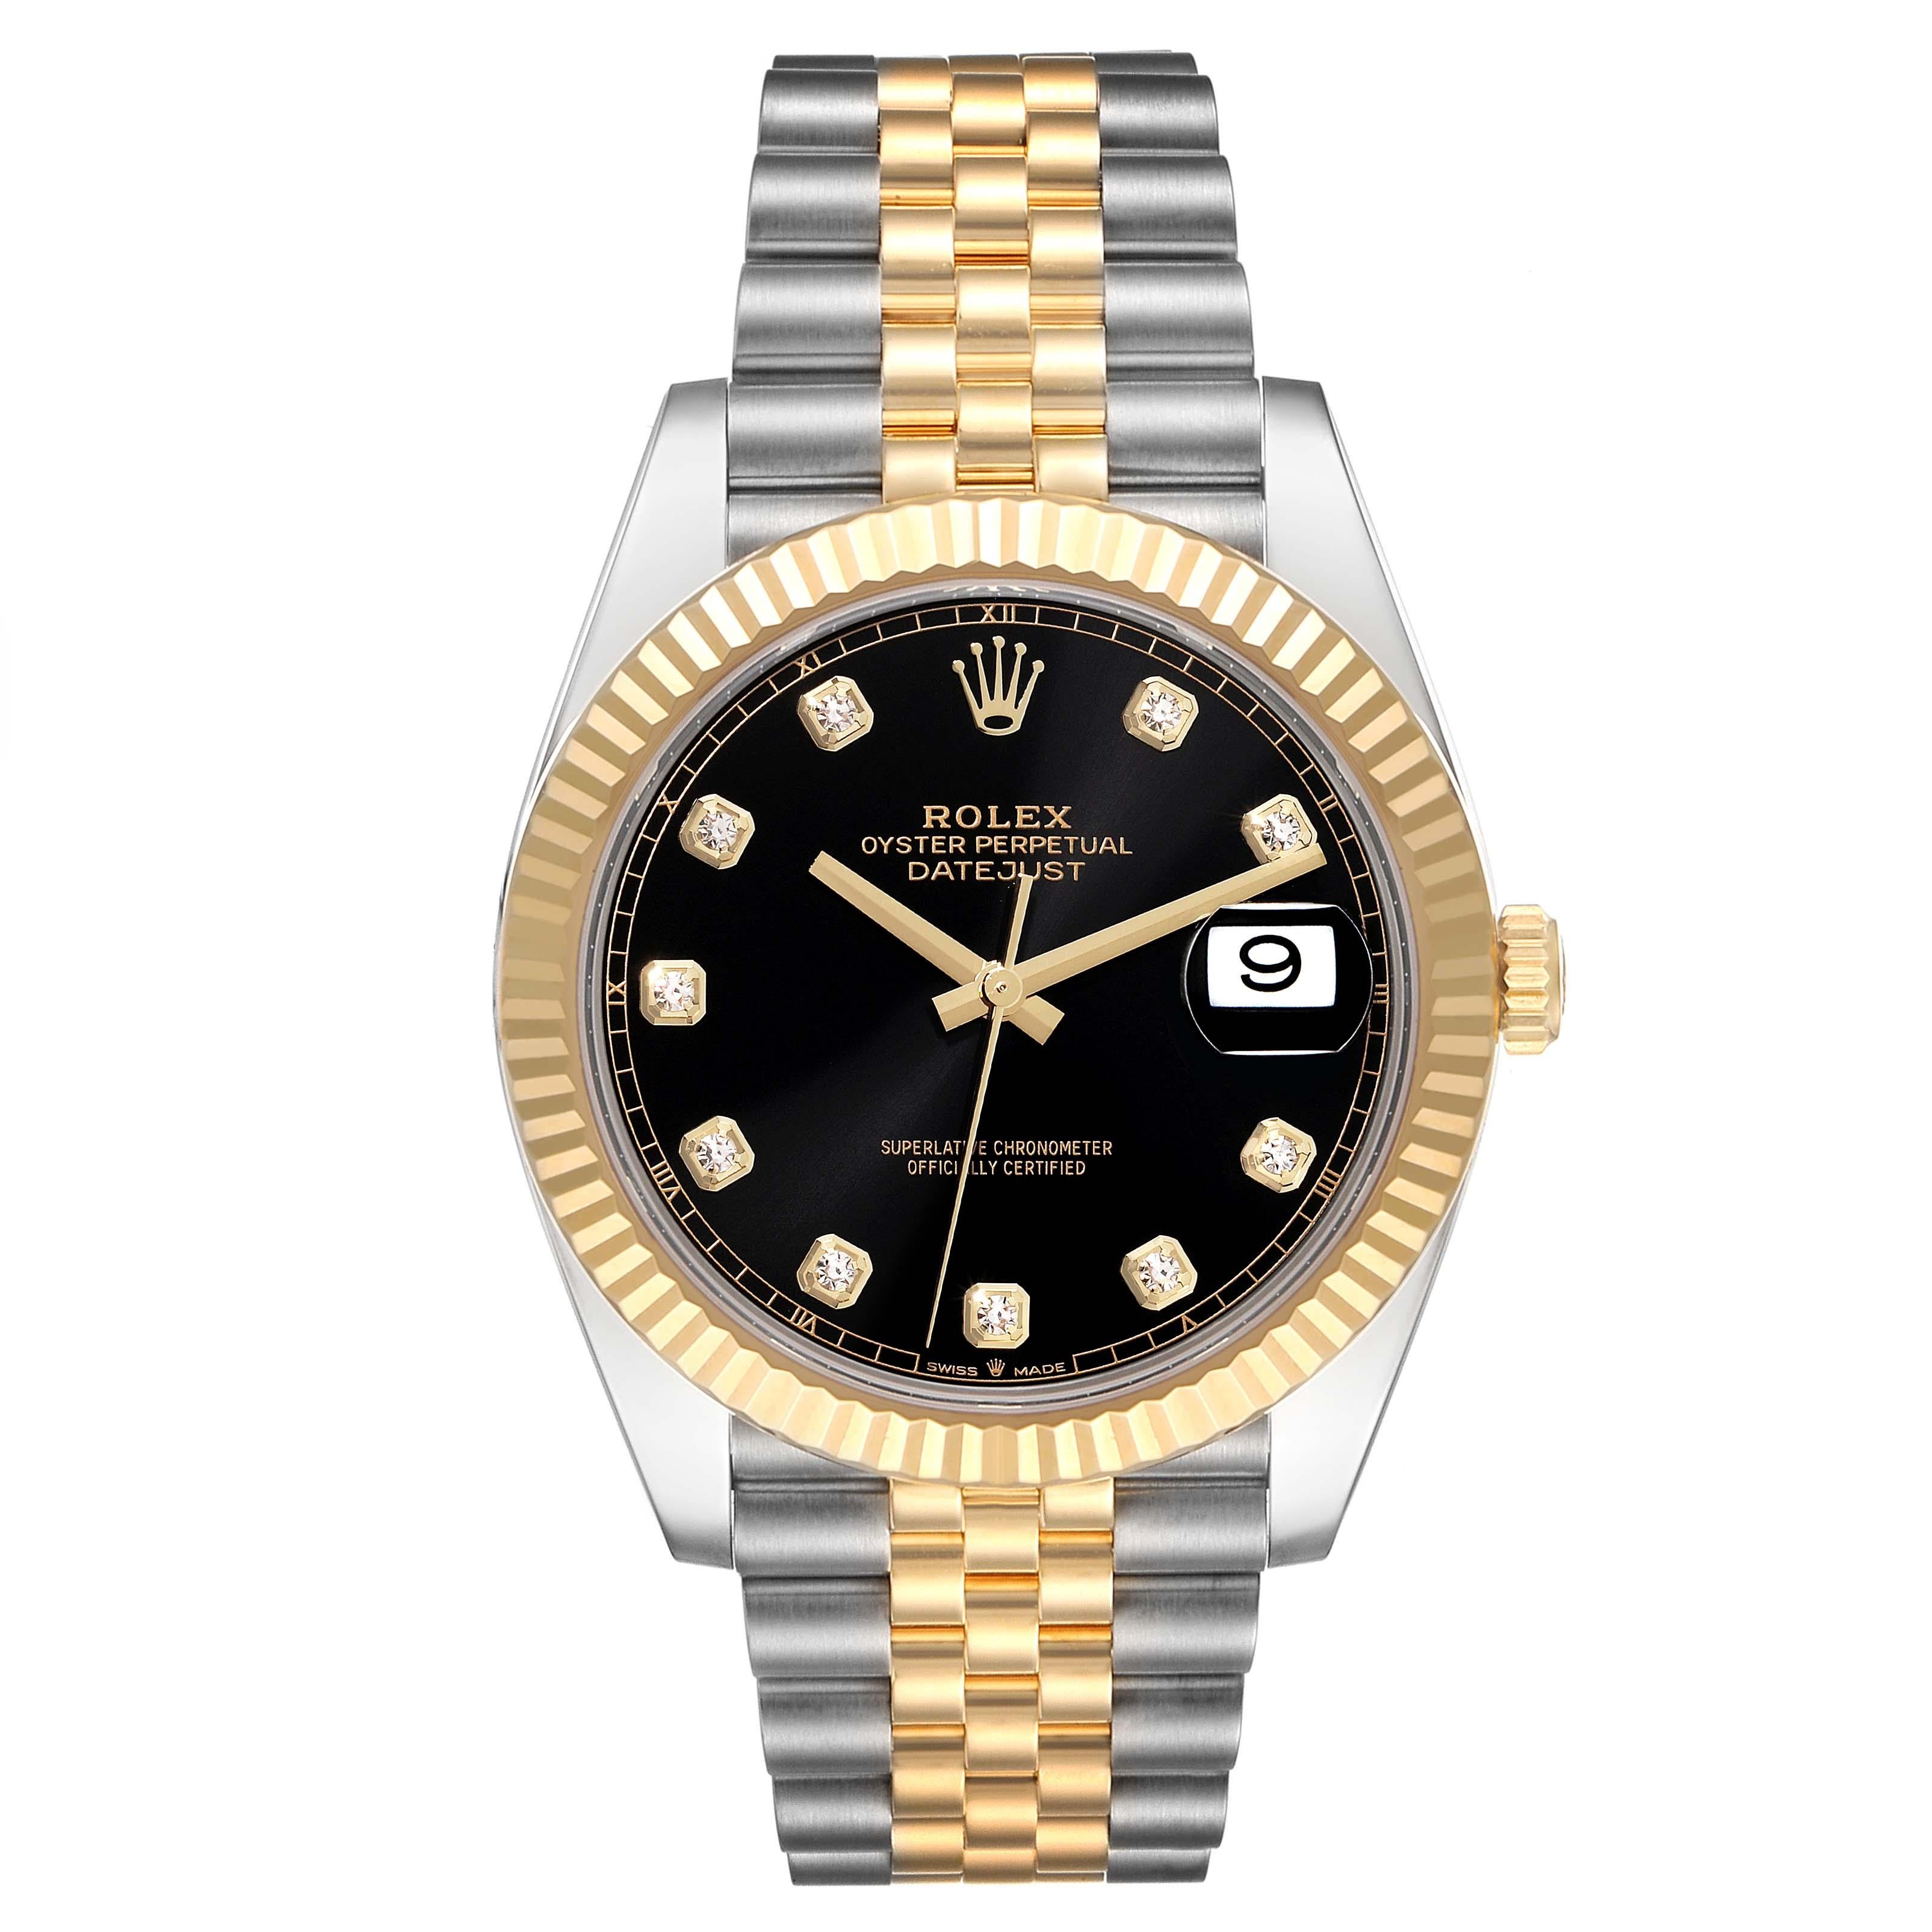 Rolex Datejust 41 Steel Yellow Gold Diamond Dial Mens Watch 126333 Box Card. Officially certified chronometer self-winding movement. Stainless steel and 18K yellow gold case 41.0 mm in diameter. Rolex logo on a crown. 18K yellow gold fluted bezel.